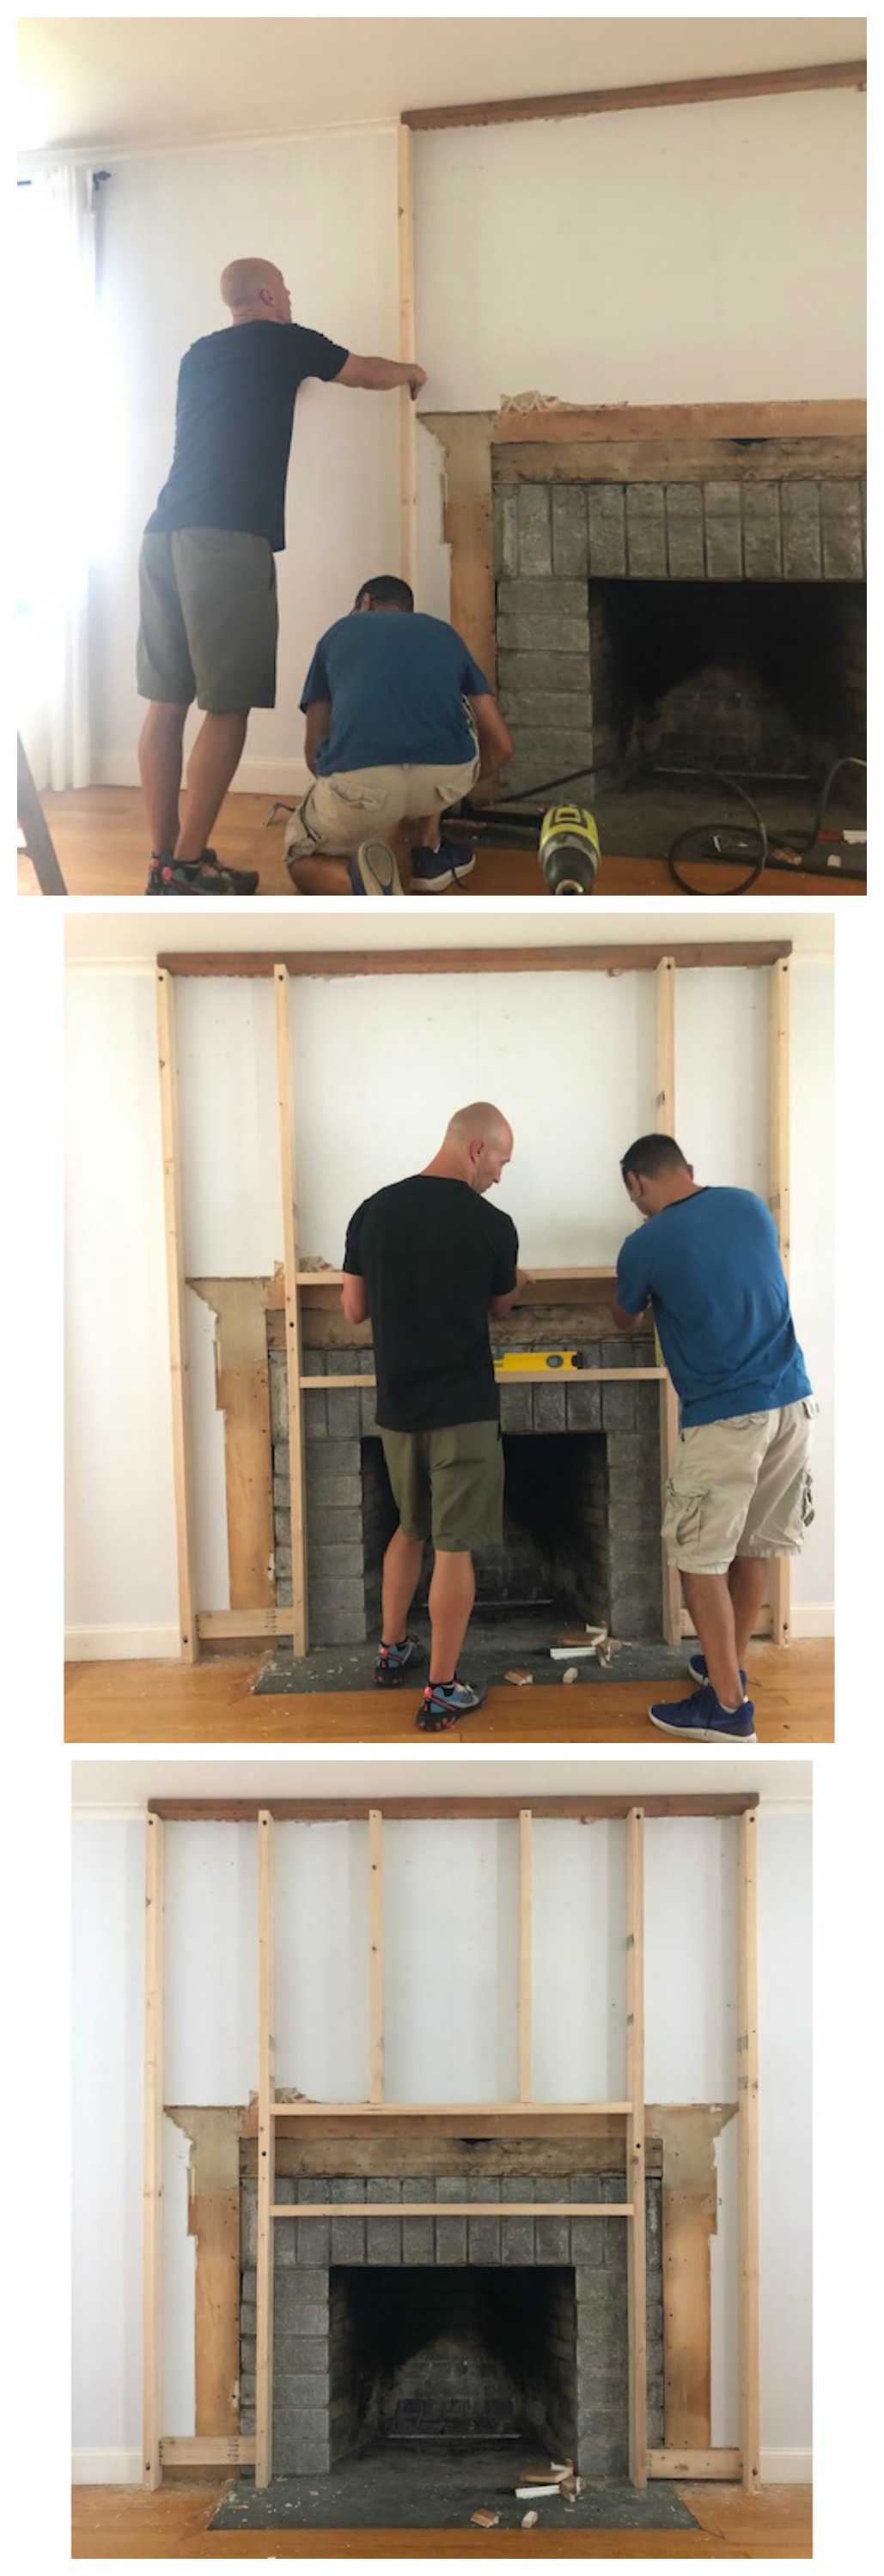 Shiplap Fireplace and Mantle DIY Tutorial